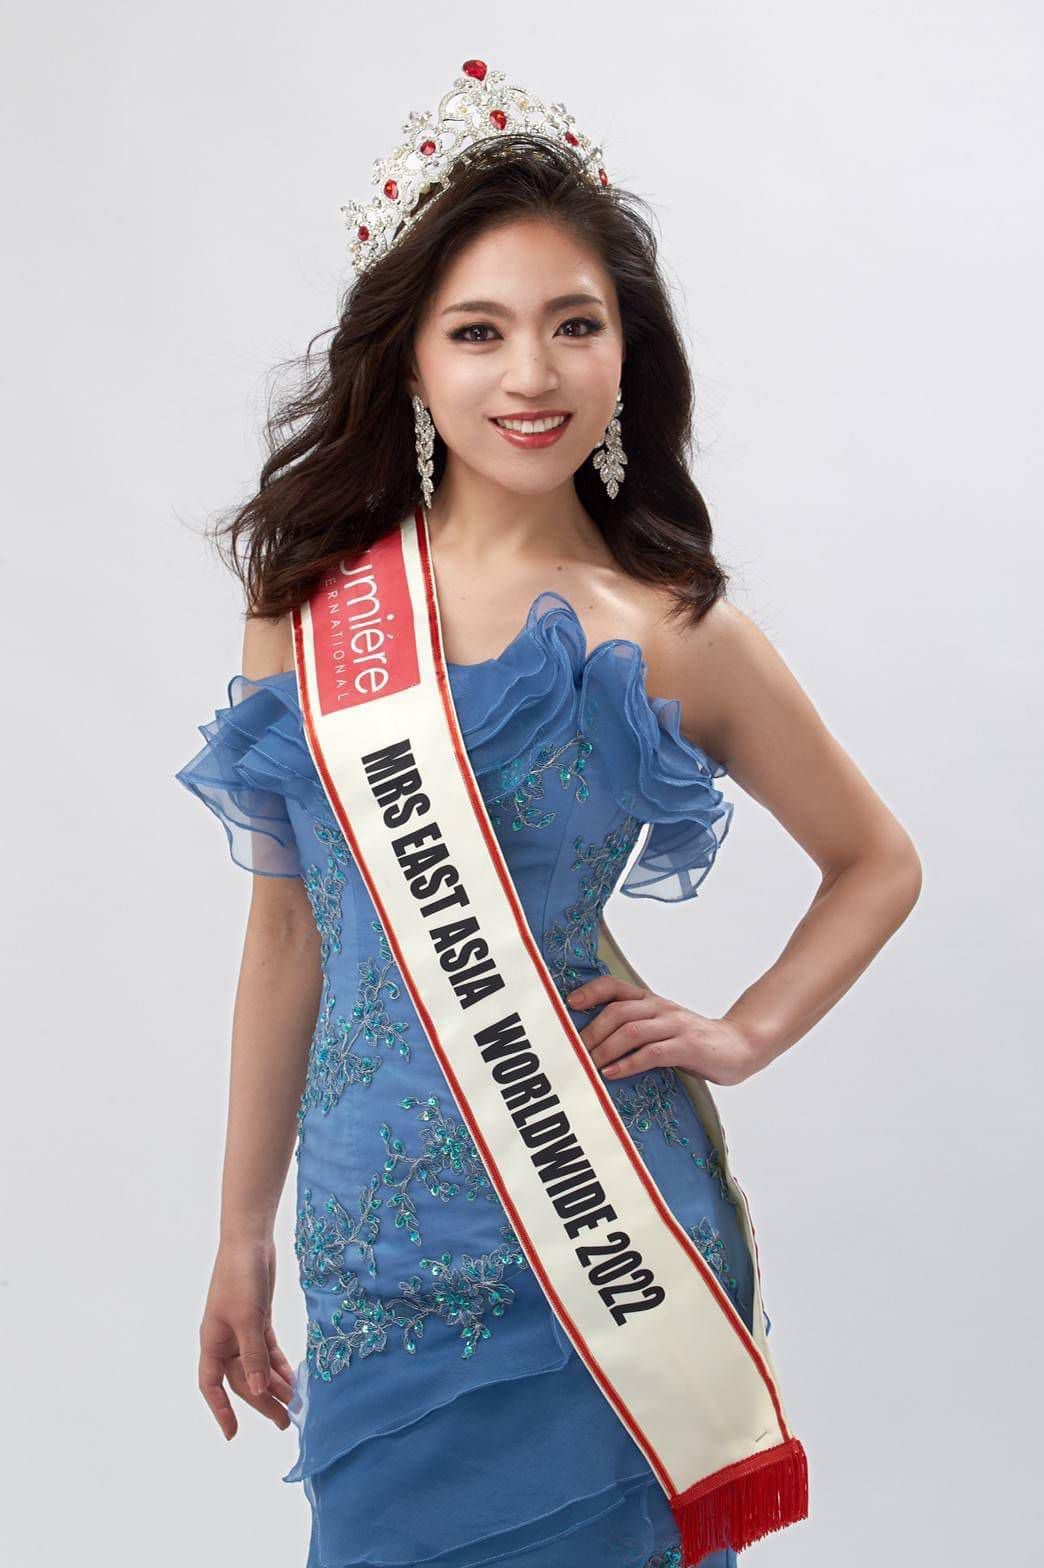 VOTE FOR MRS EAST ASIA WORLDWIDE 2022